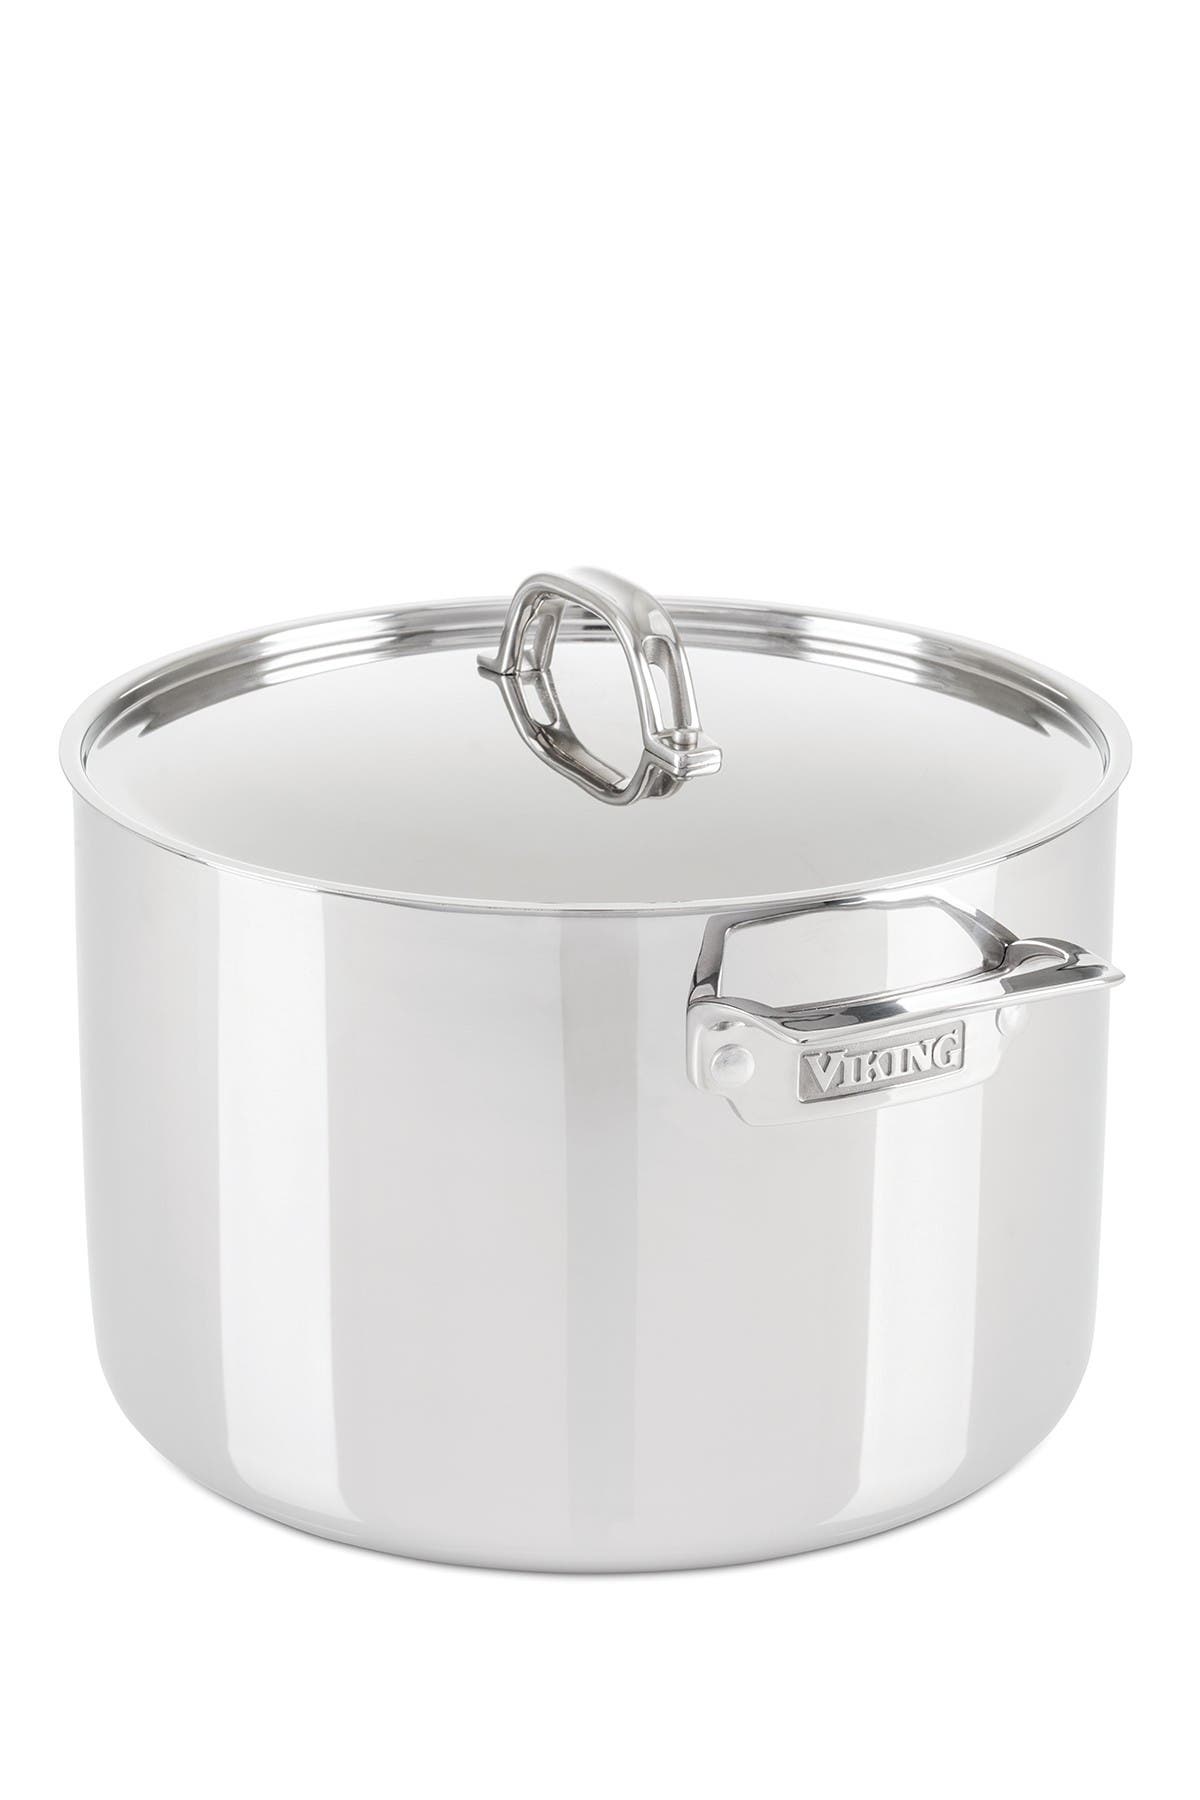 VIKING 3-PLY 12 QUART MIRROR FINISH STAINLESS STEEL STOCK POT WITH METAL LID,840595101702